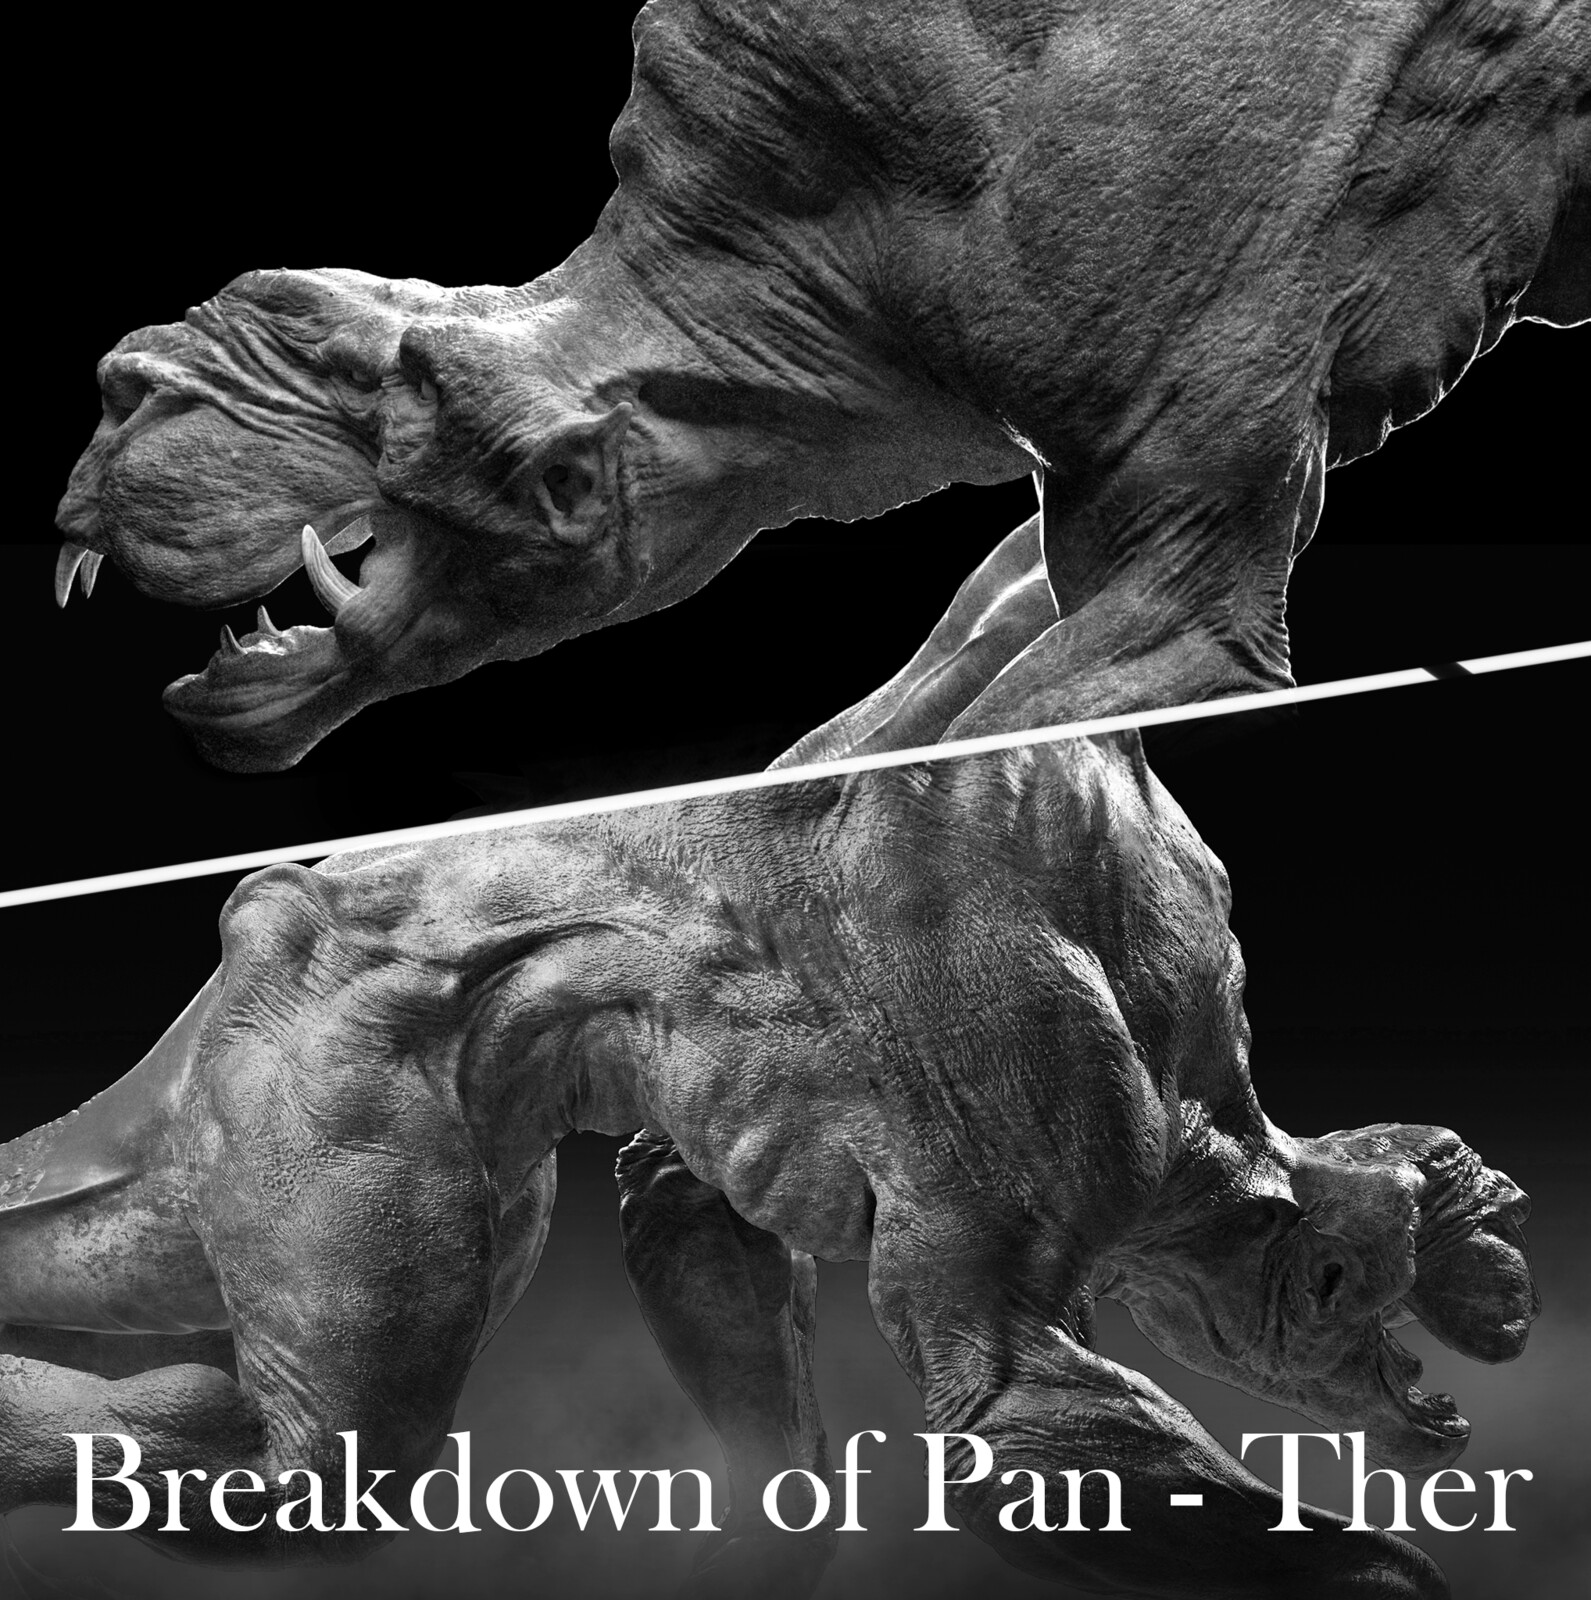 Sci-fi creature concept: "Pan - Ther"